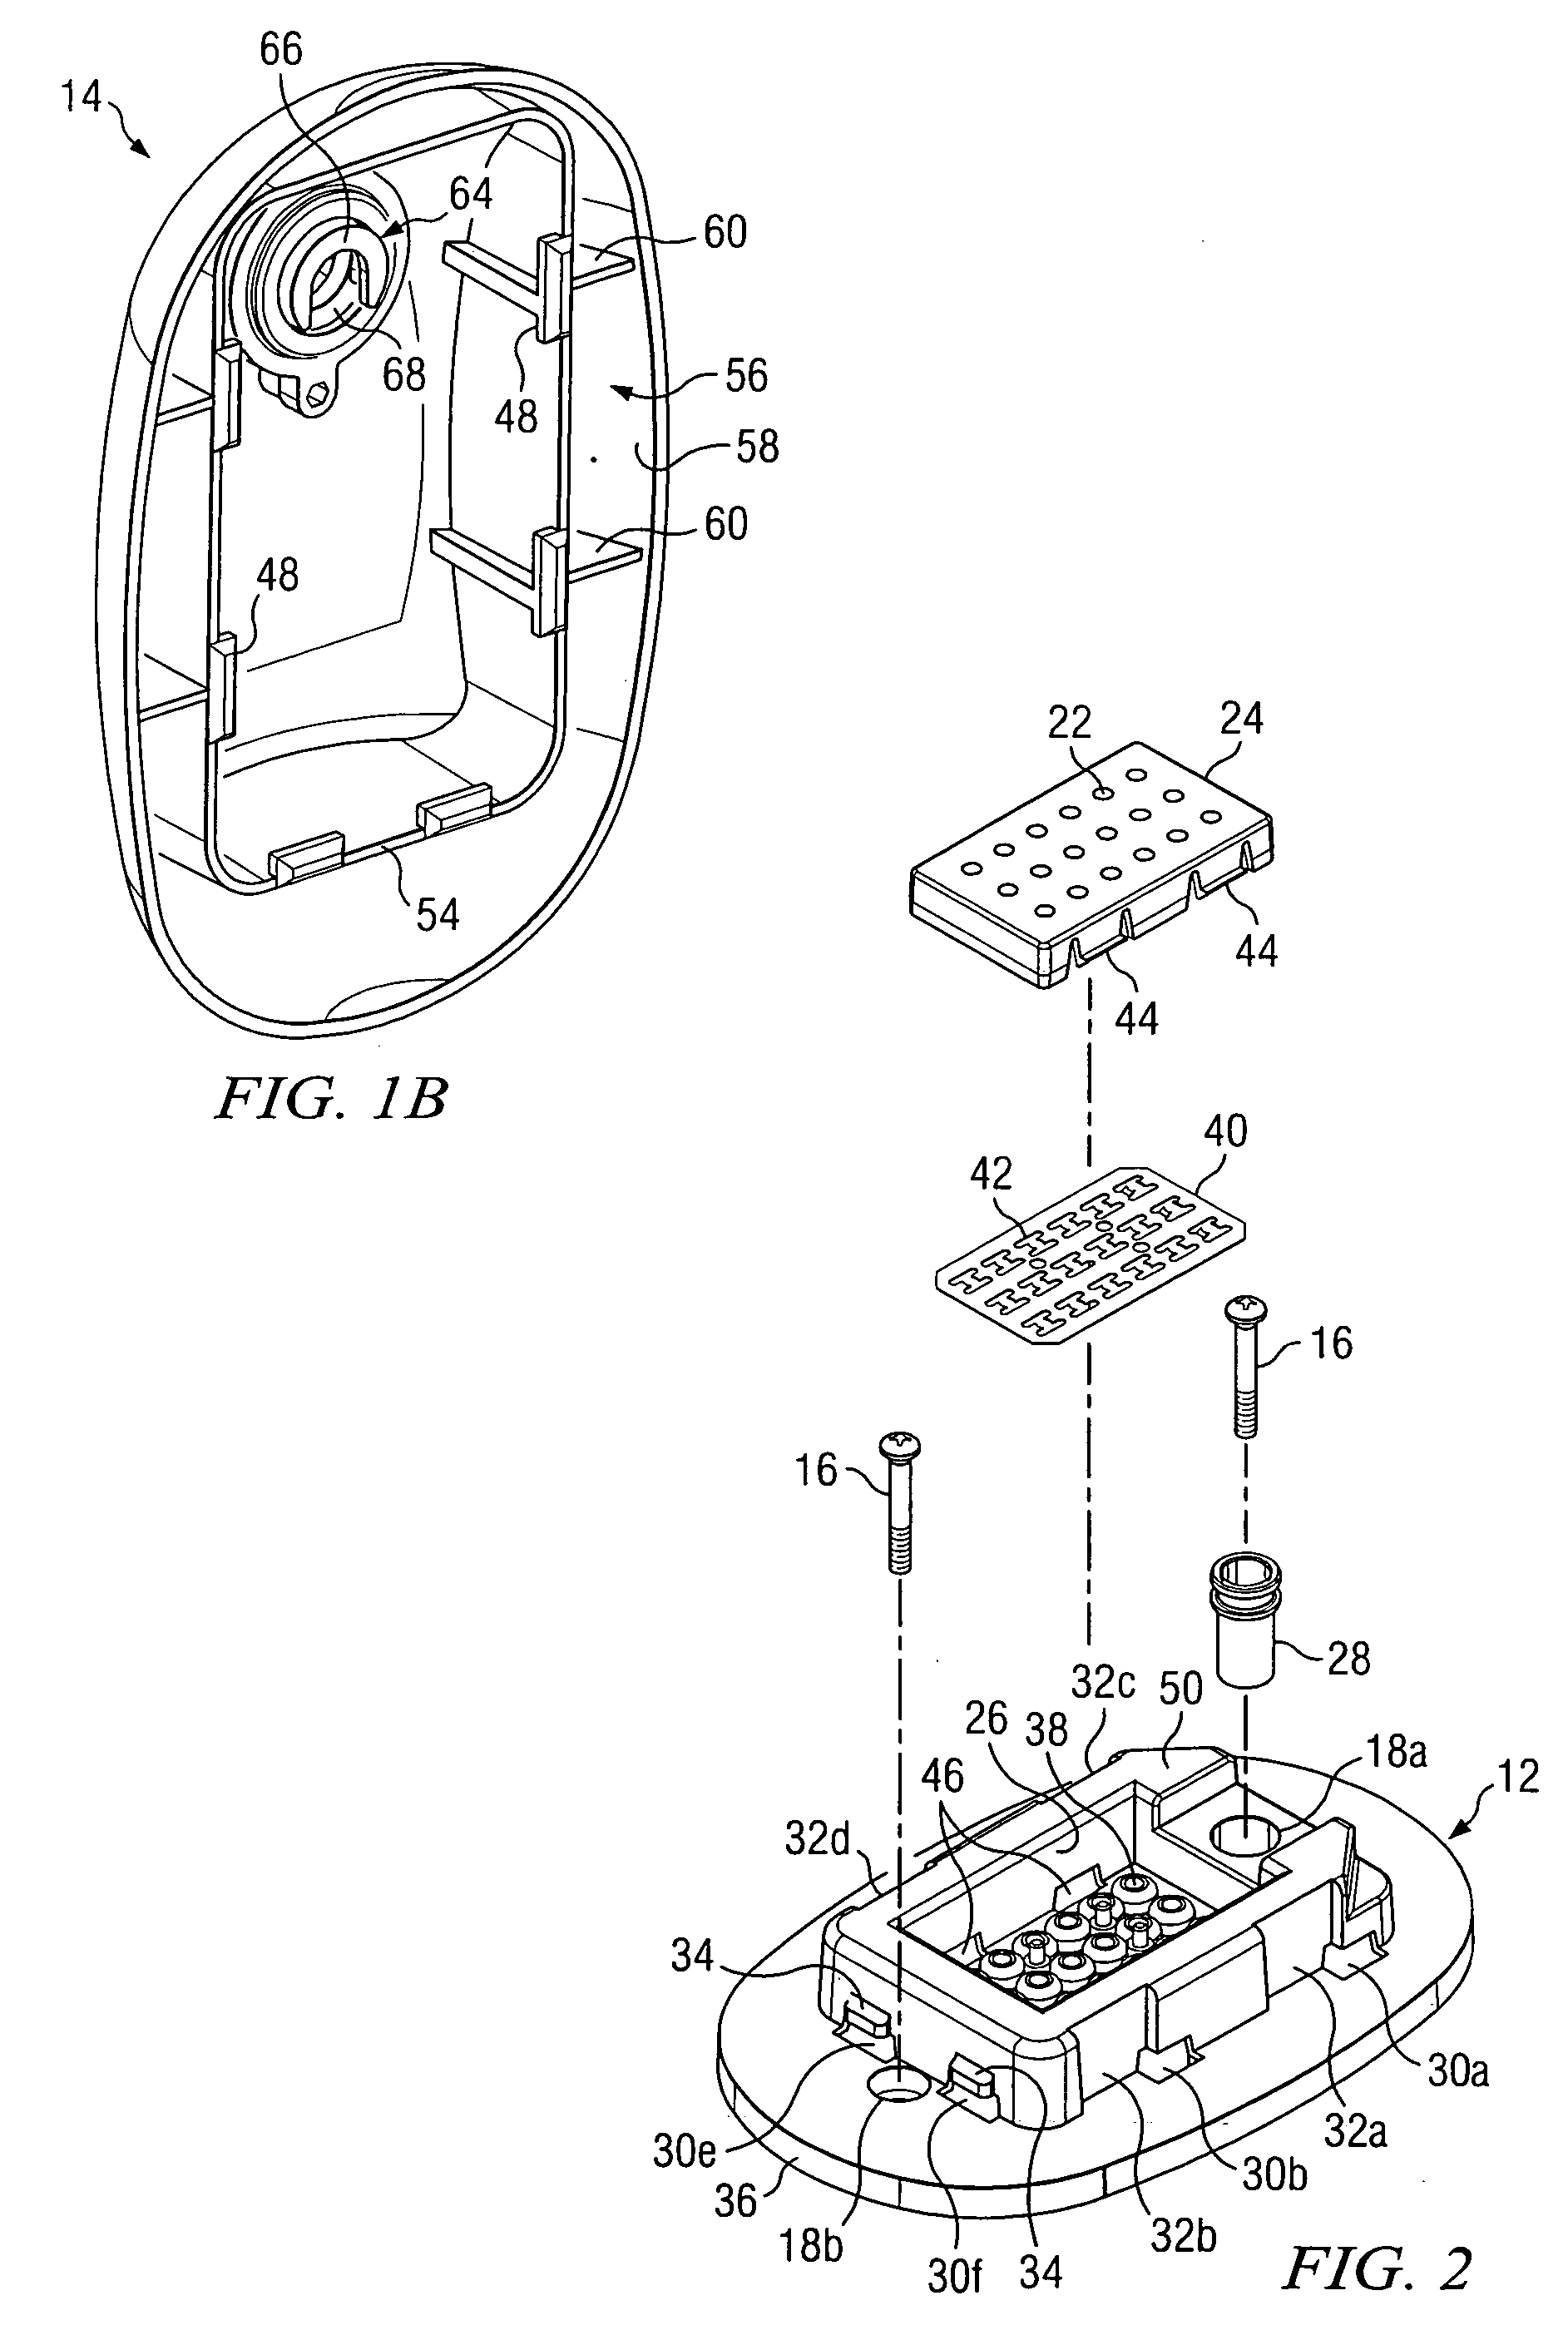 Key for engaging a locking mechanism of a port cover for protecting from unauthorized access one or more ports of a system integrated into a structure for injection of a material into one or more cavities in the structure